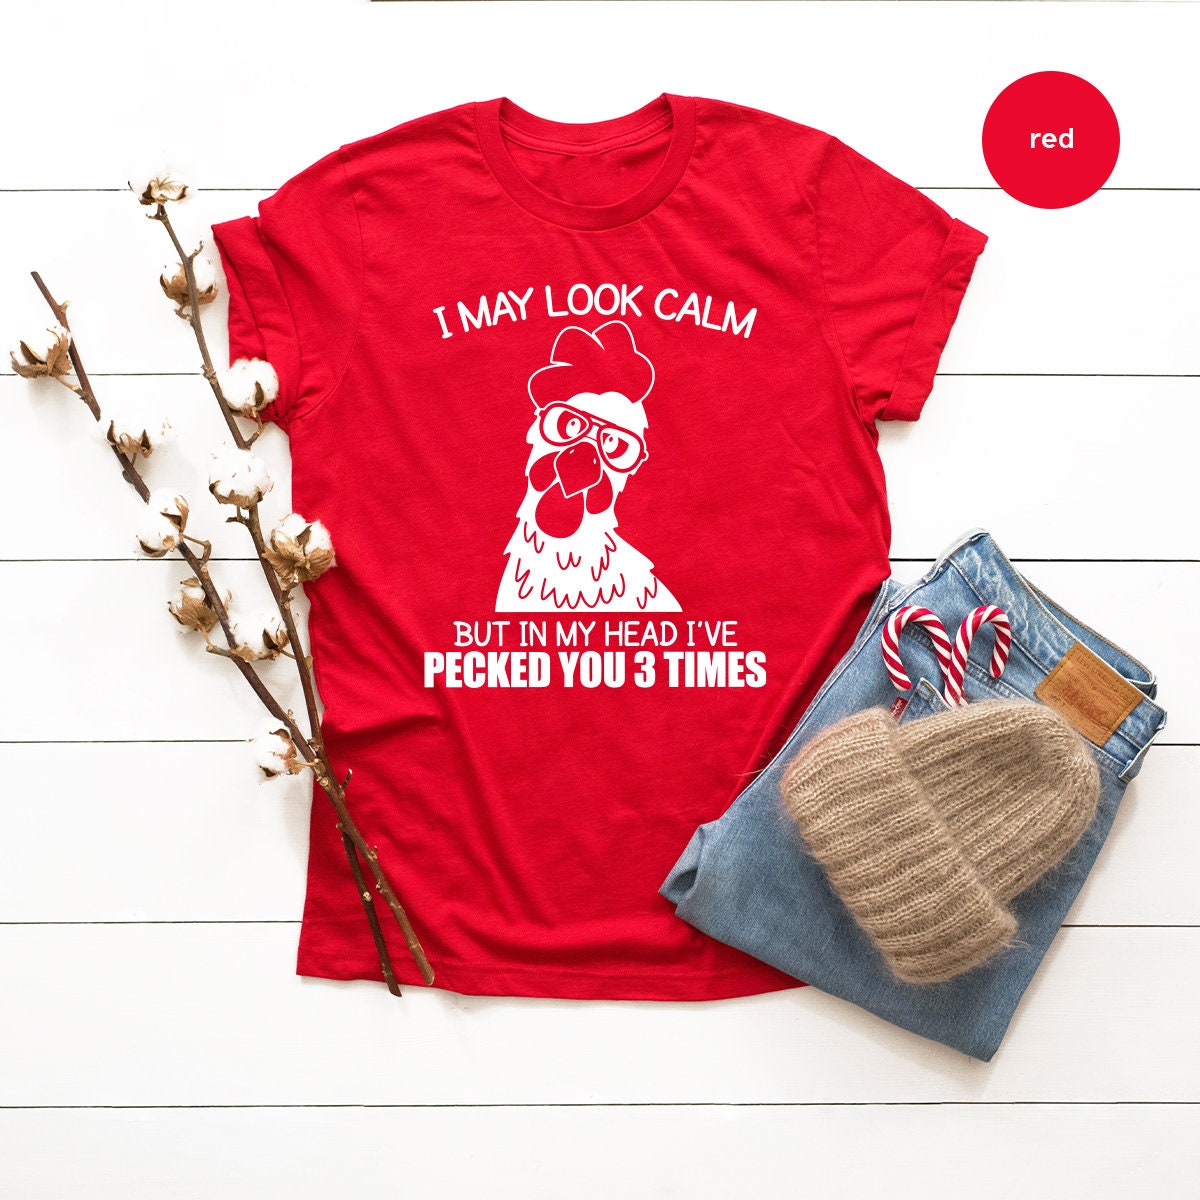 Funny Quote T Shirt, Rooster Humor Shirt, Sarcastic Shirt, I May Look Calm But In My Head I've Pecked You 3 Times Shirt, Funny Chicken Shirt - Fastdeliverytees.com